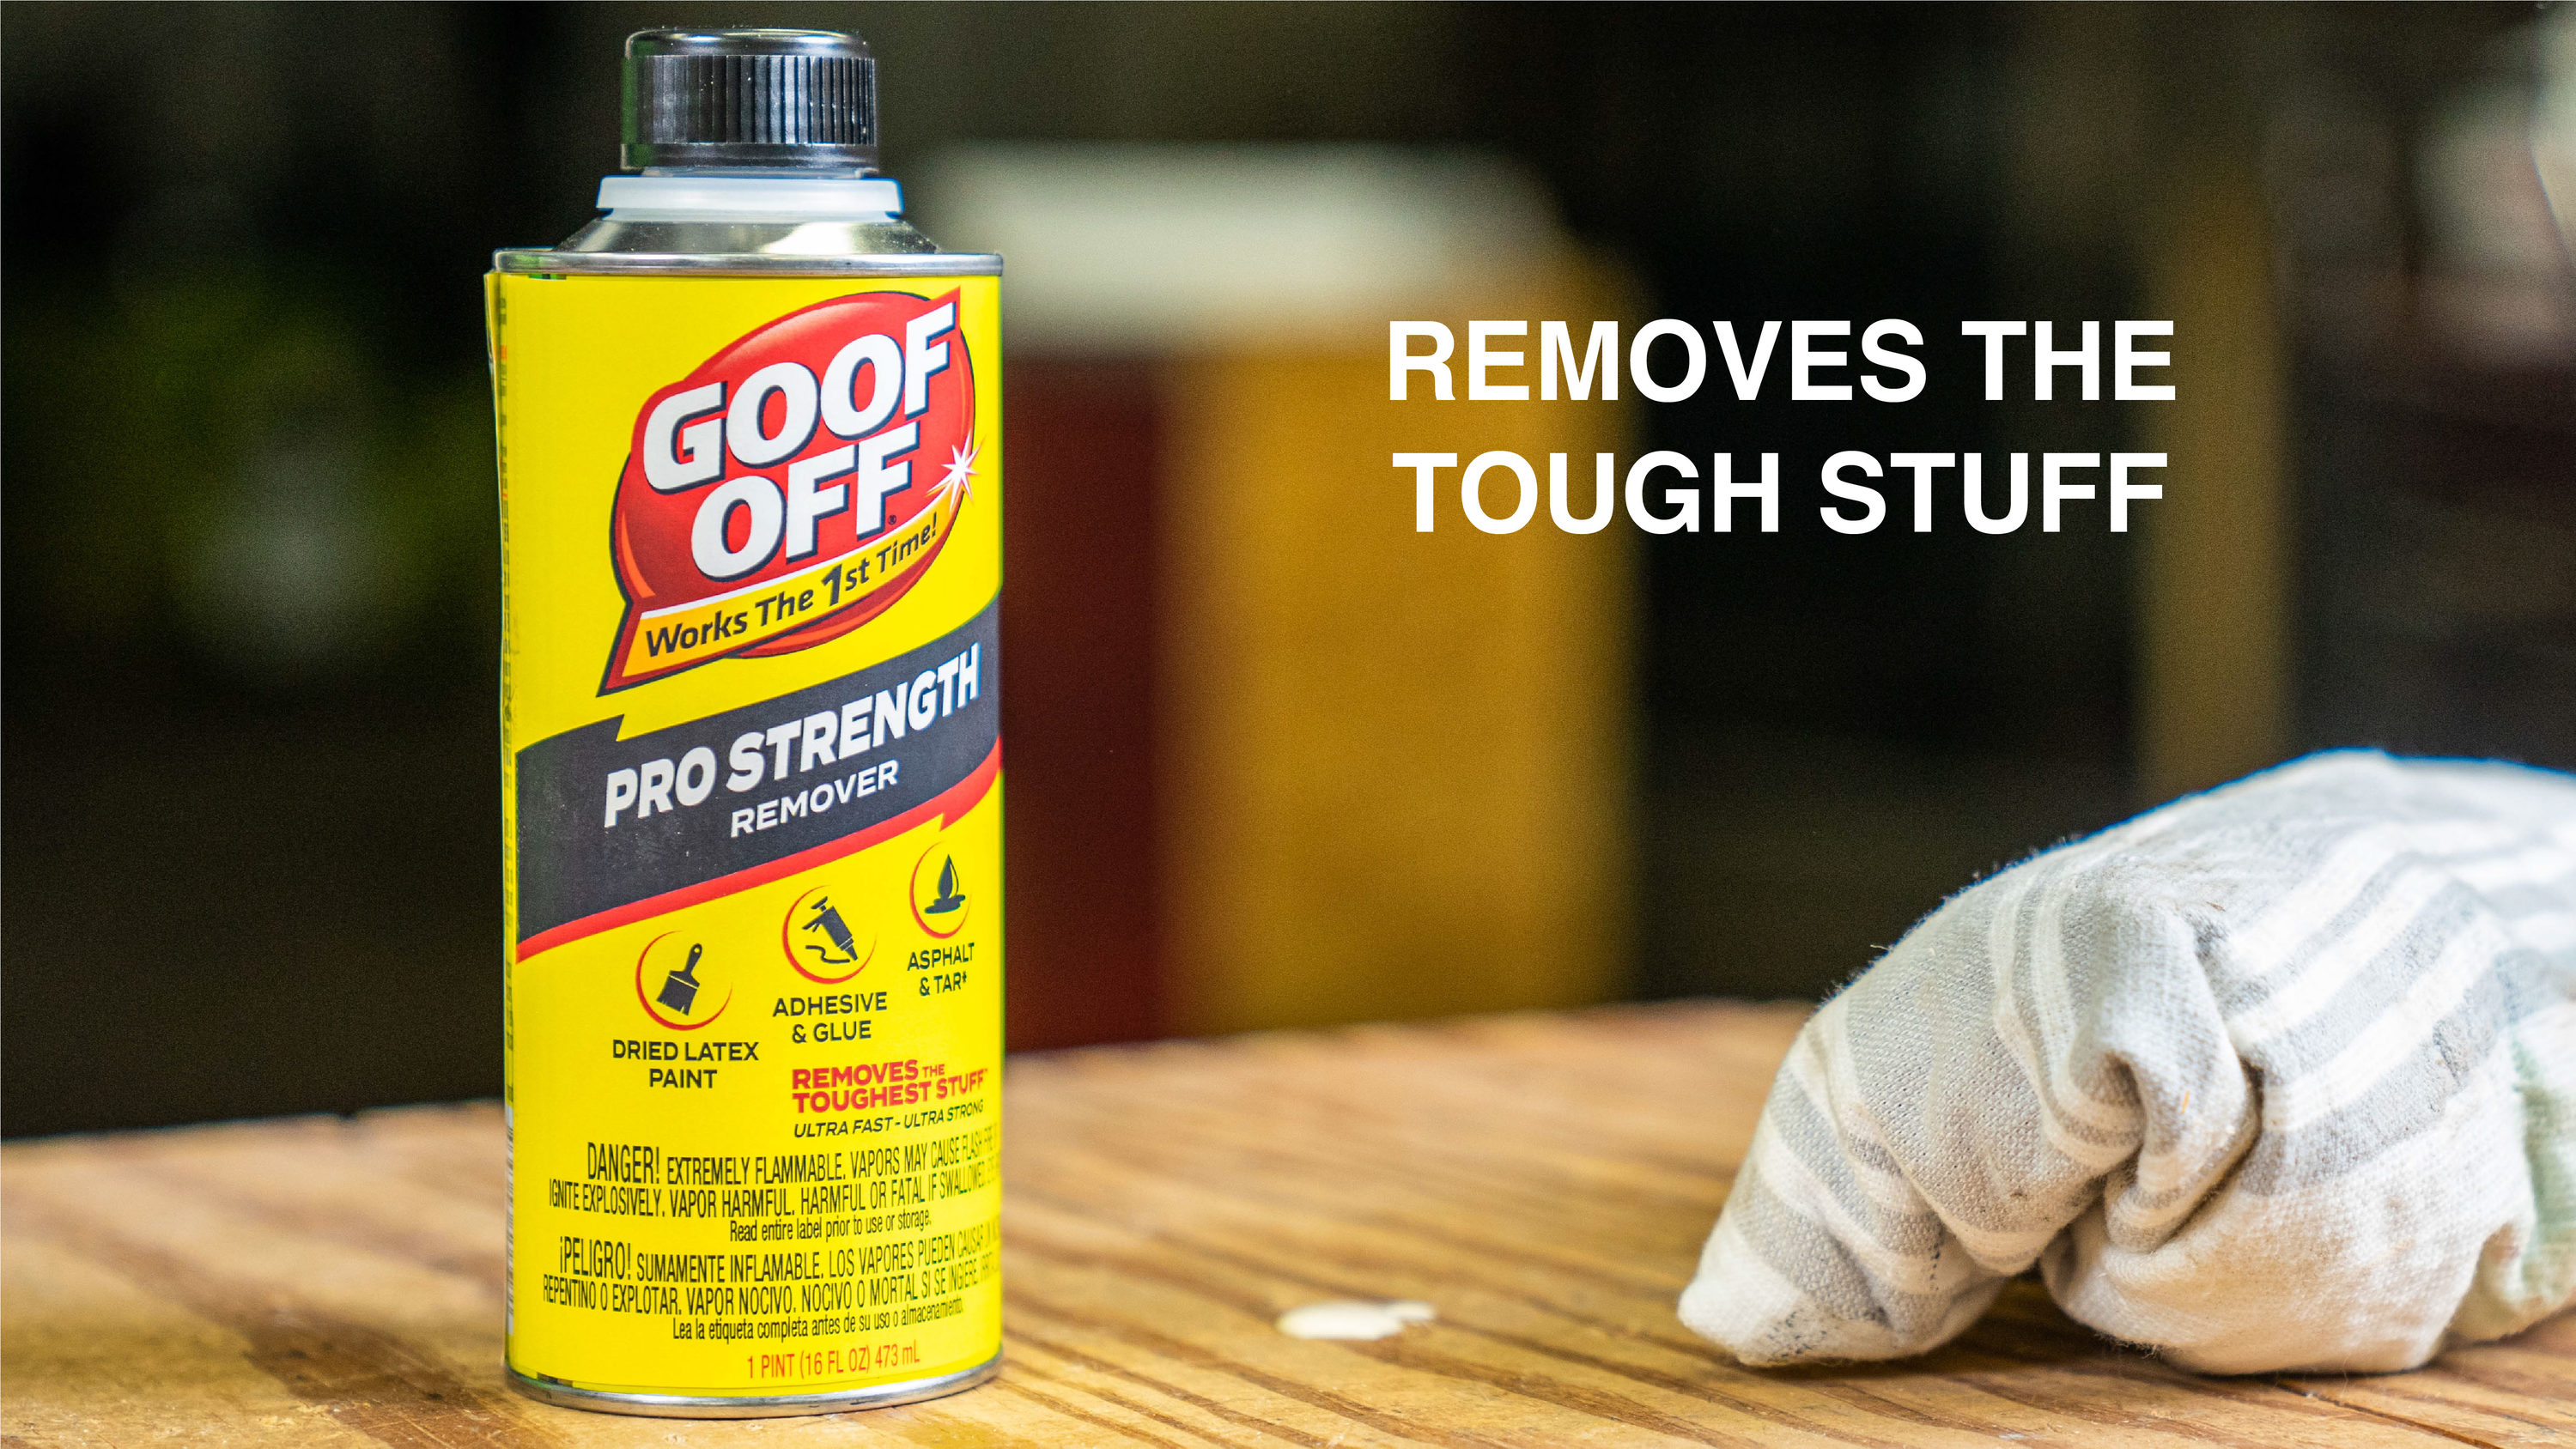 Goof Off Professional Strength Remover Remove Dried Latex Paint Adhesive  16oz